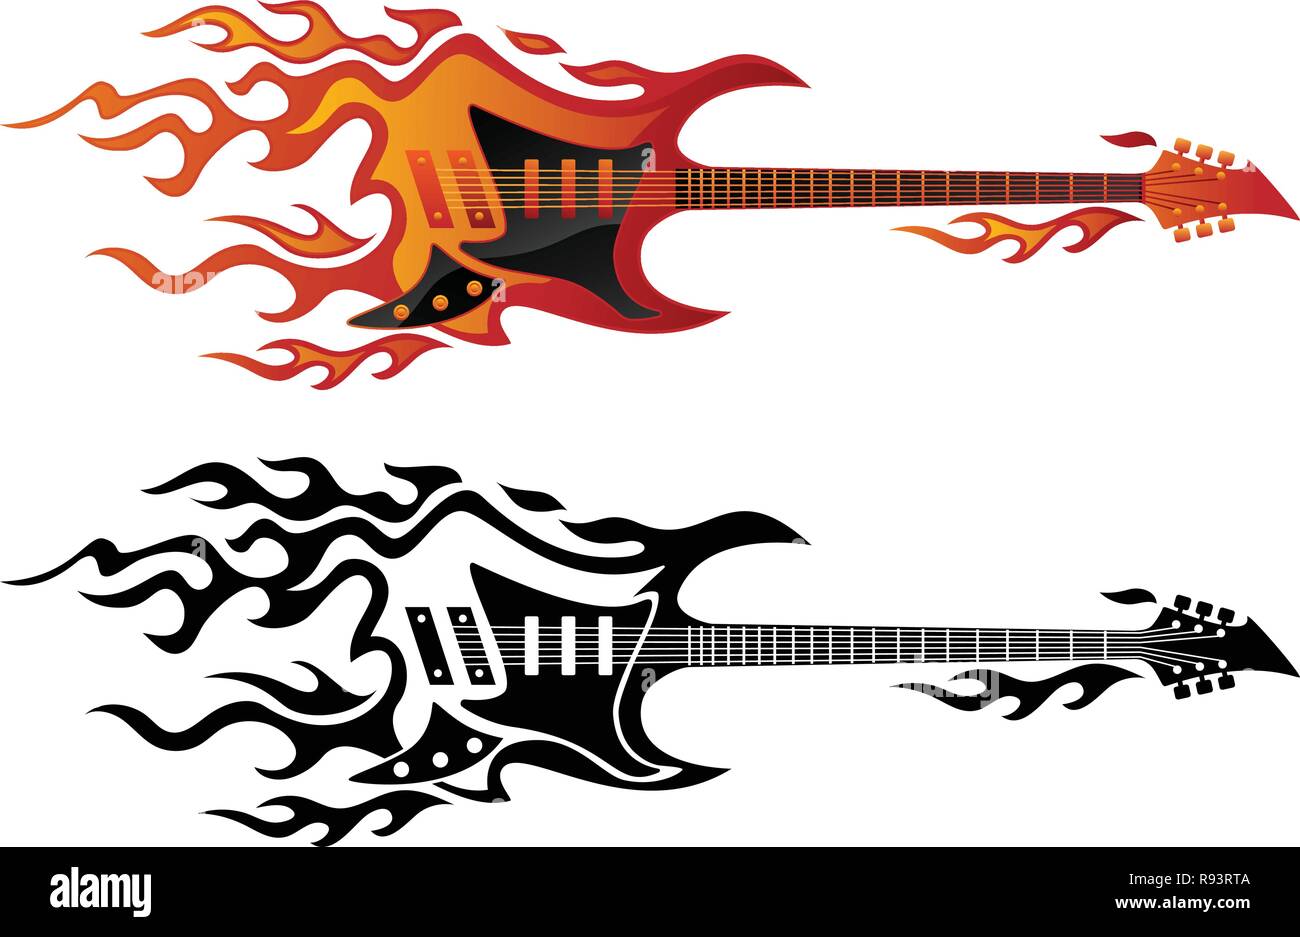 Electric guitar on fire in full color and black flames vector illustration Stock Vector